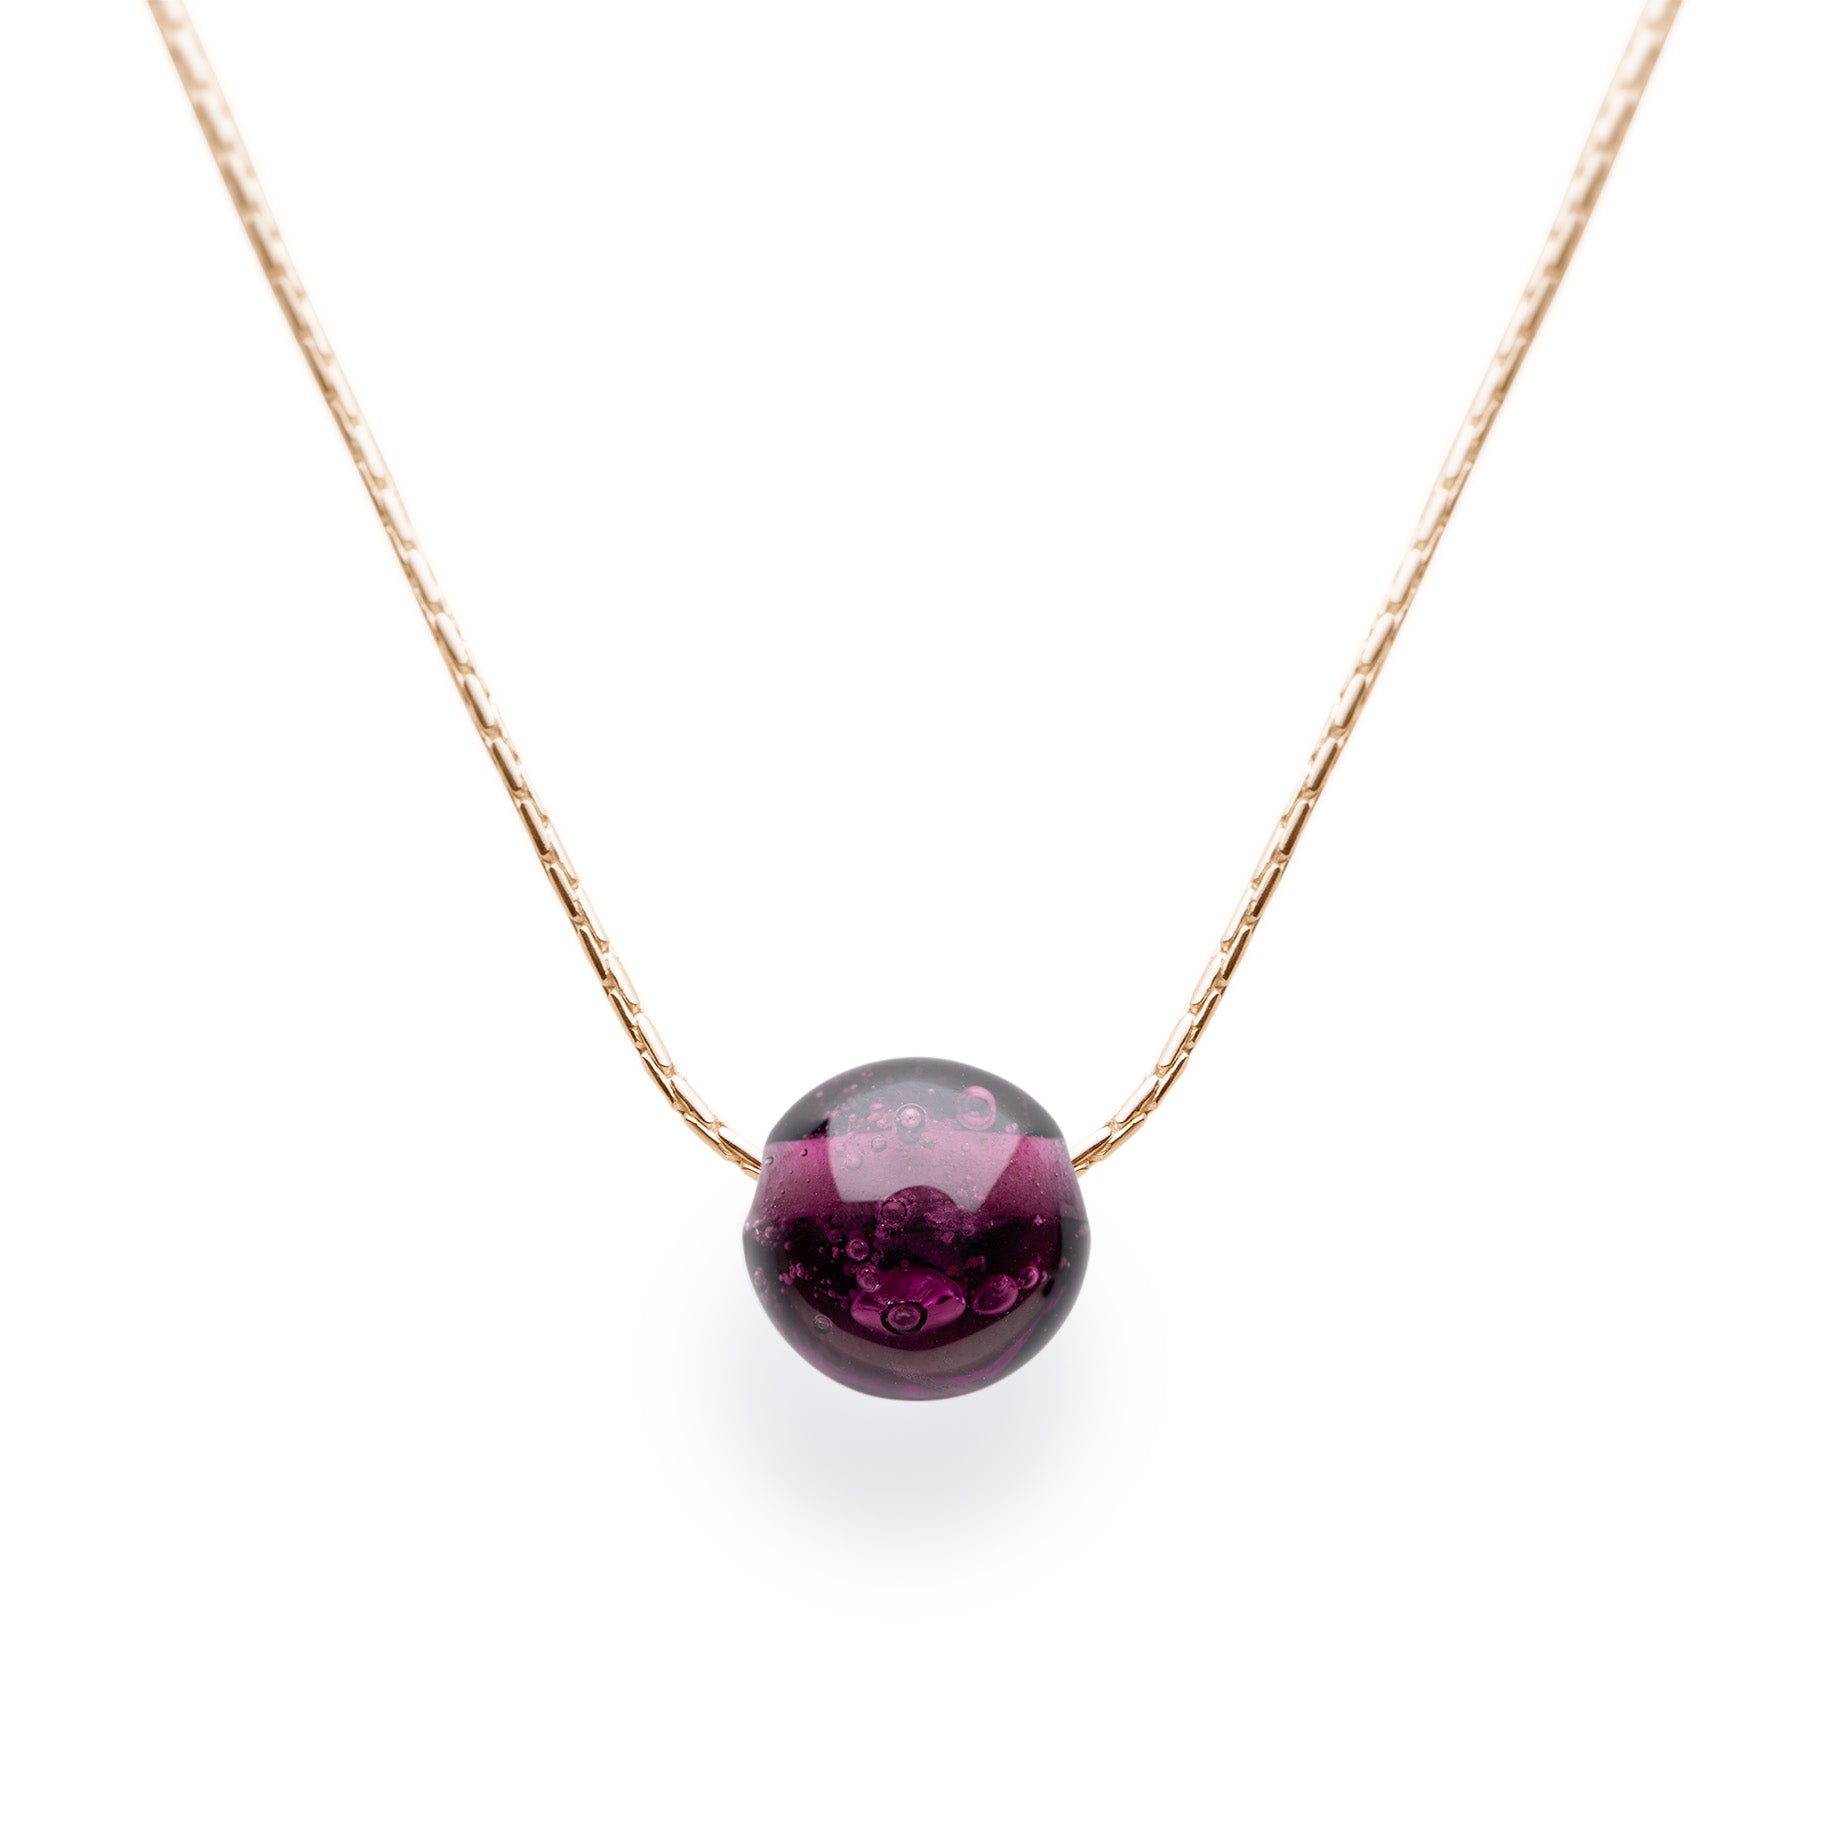 Dark berry purple glass bead necklace with beach sand on gold fill fine chain necklace.